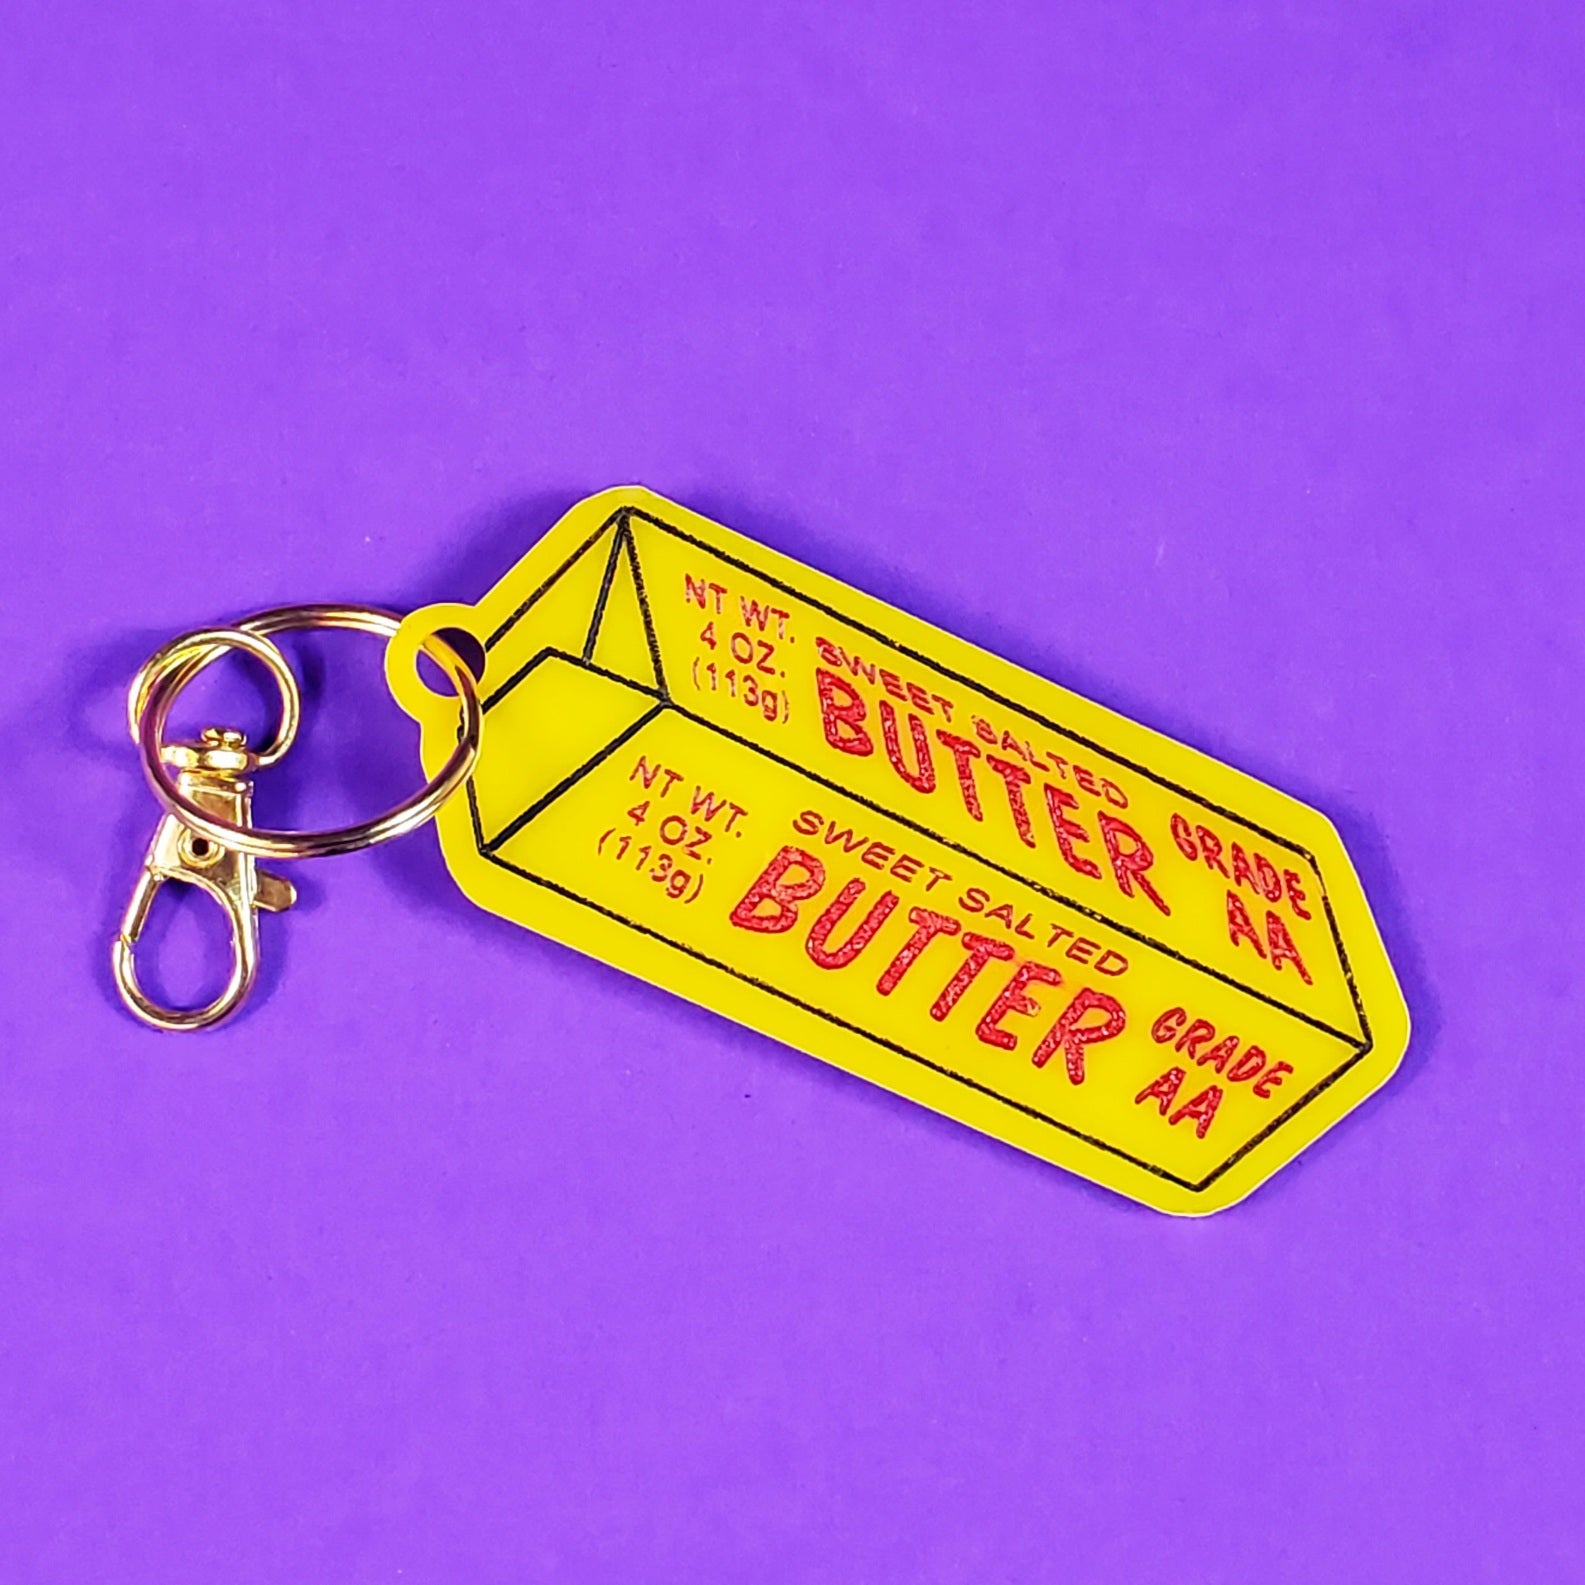 Yellow laser-cut acrylic keychain in the shape of a stick of butter with red and black painted details. Split ring and hook are shiny gold metal.